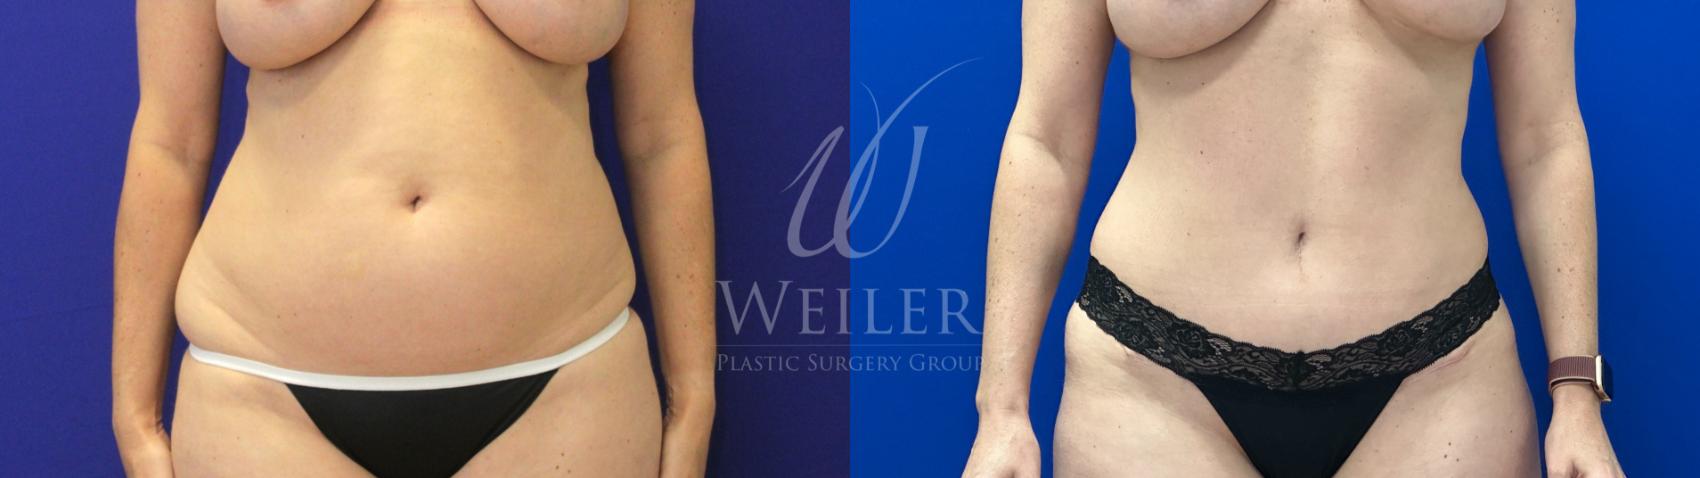 Before & After Tummy Tuck Case 1226 Front View in Baton Rouge, New Orleans, & Lafayette, Louisiana